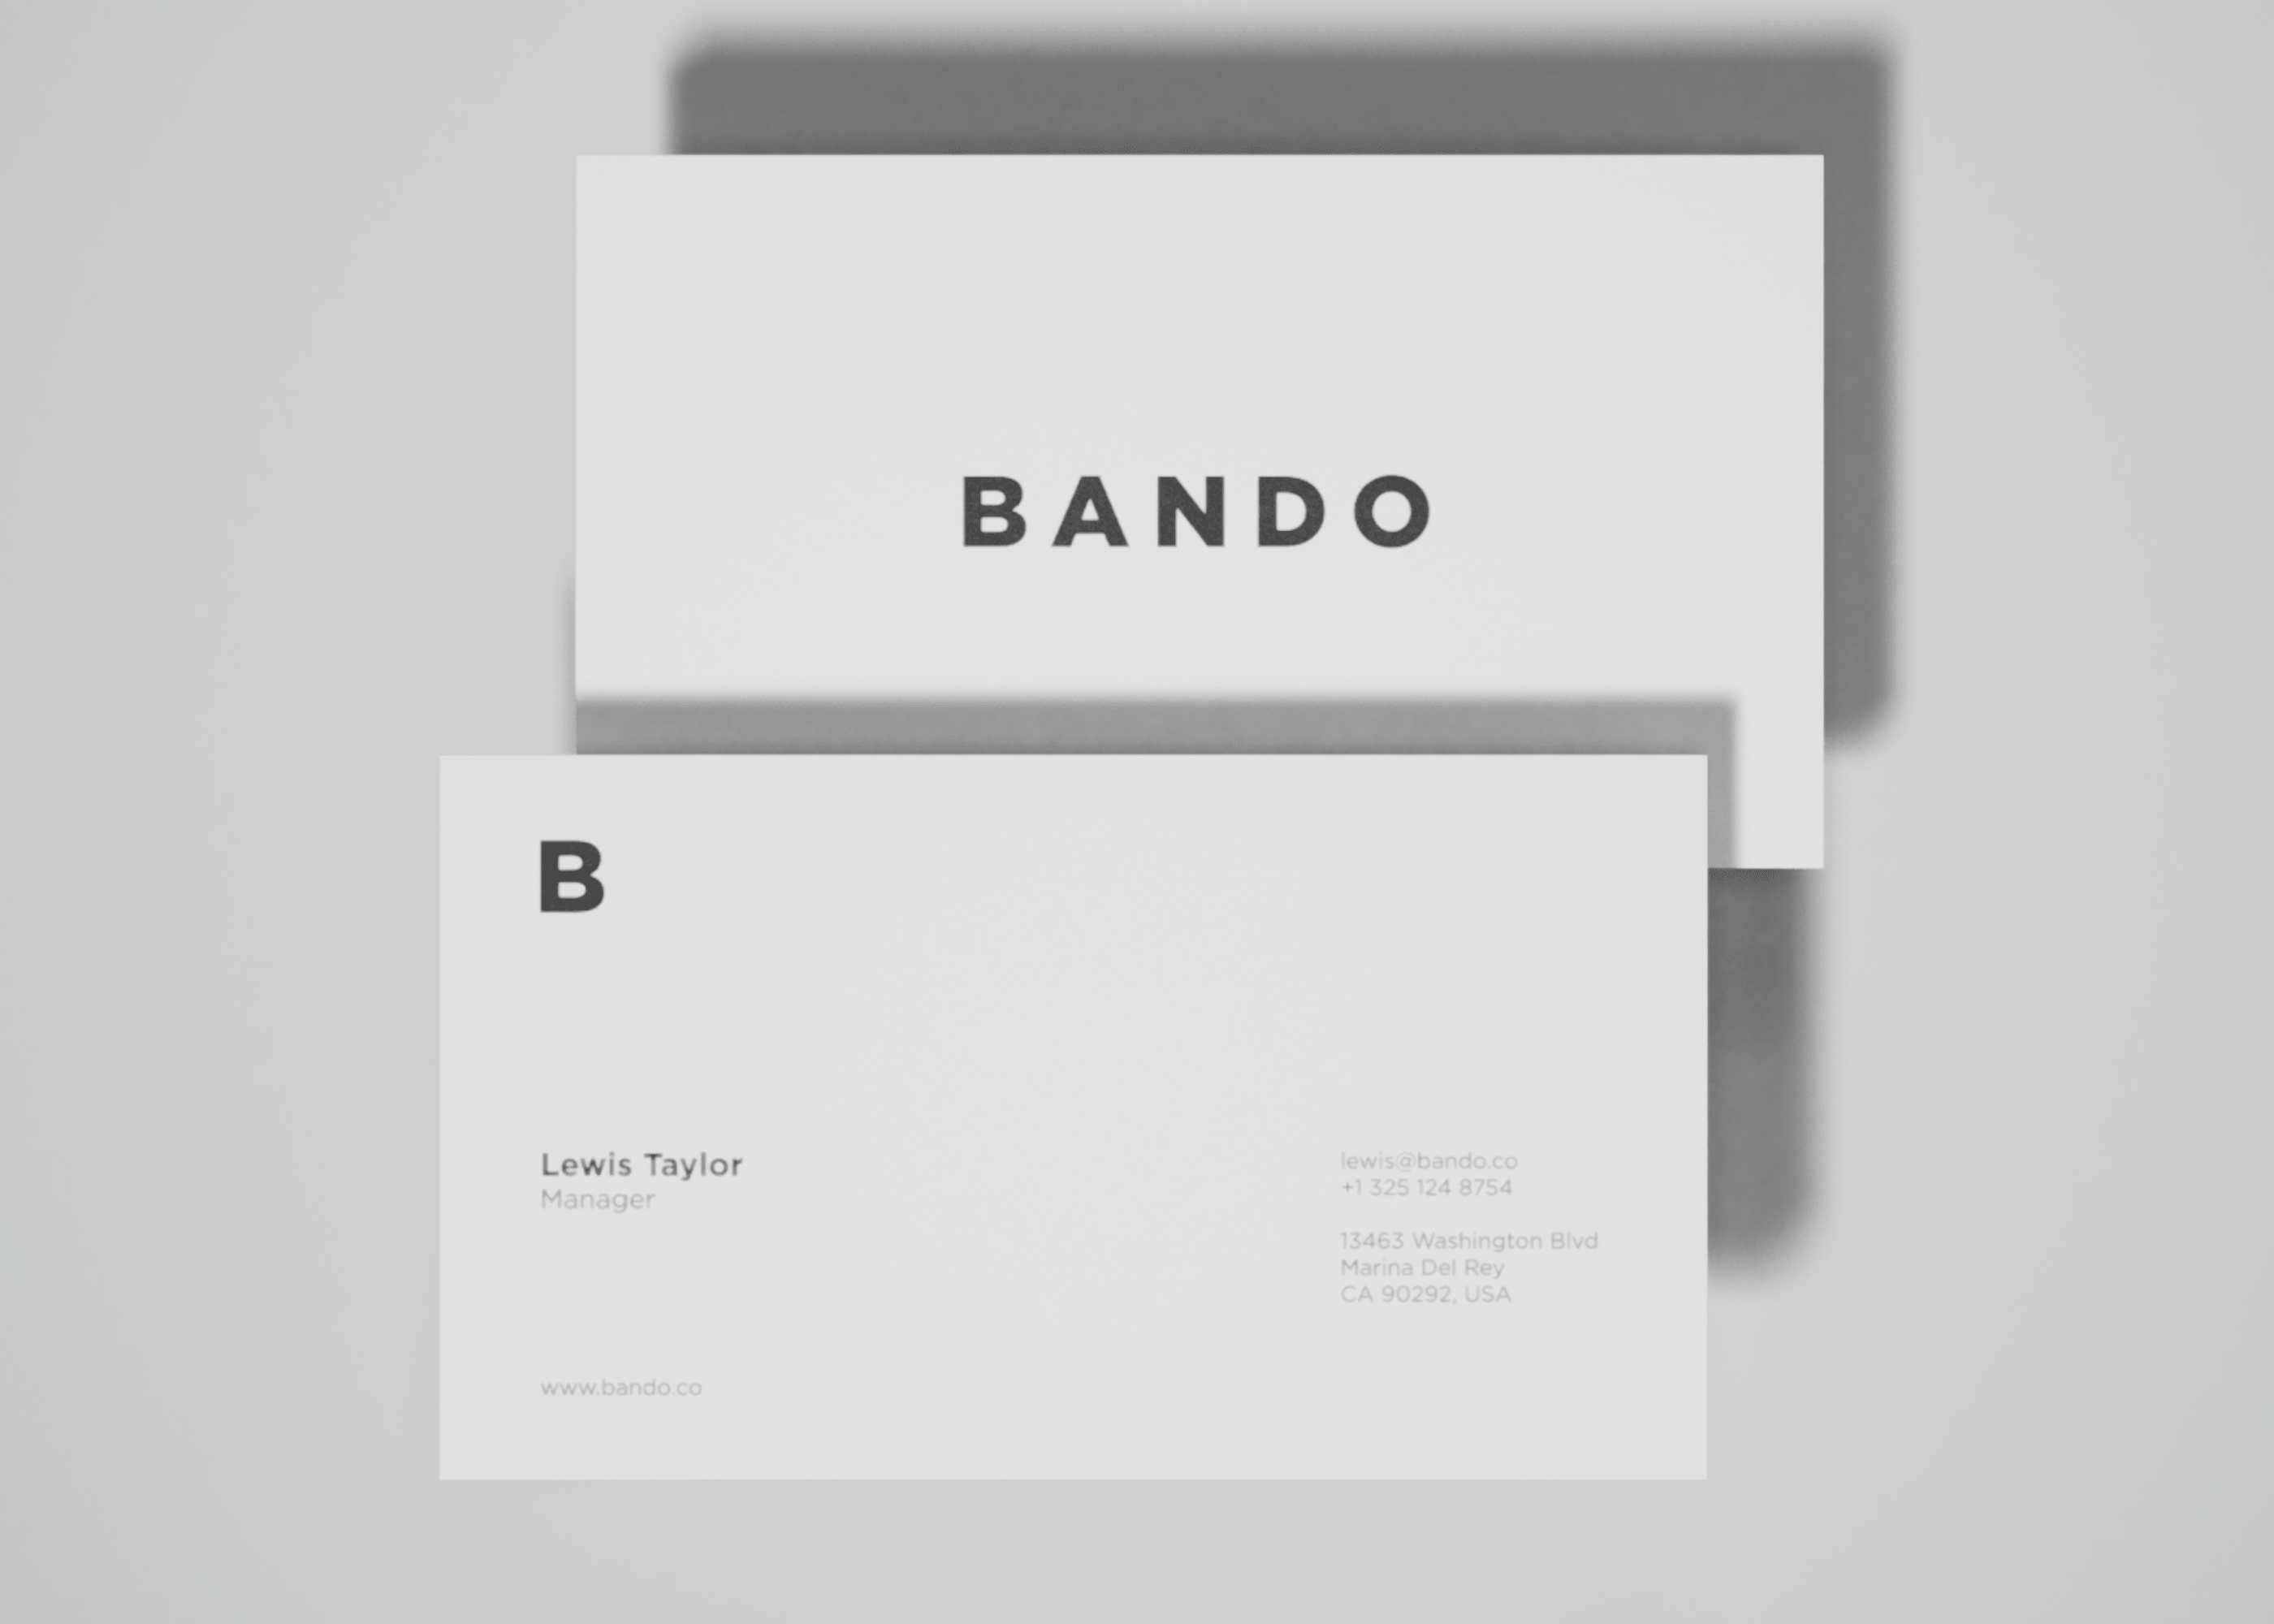 3 x 3 business cards 5